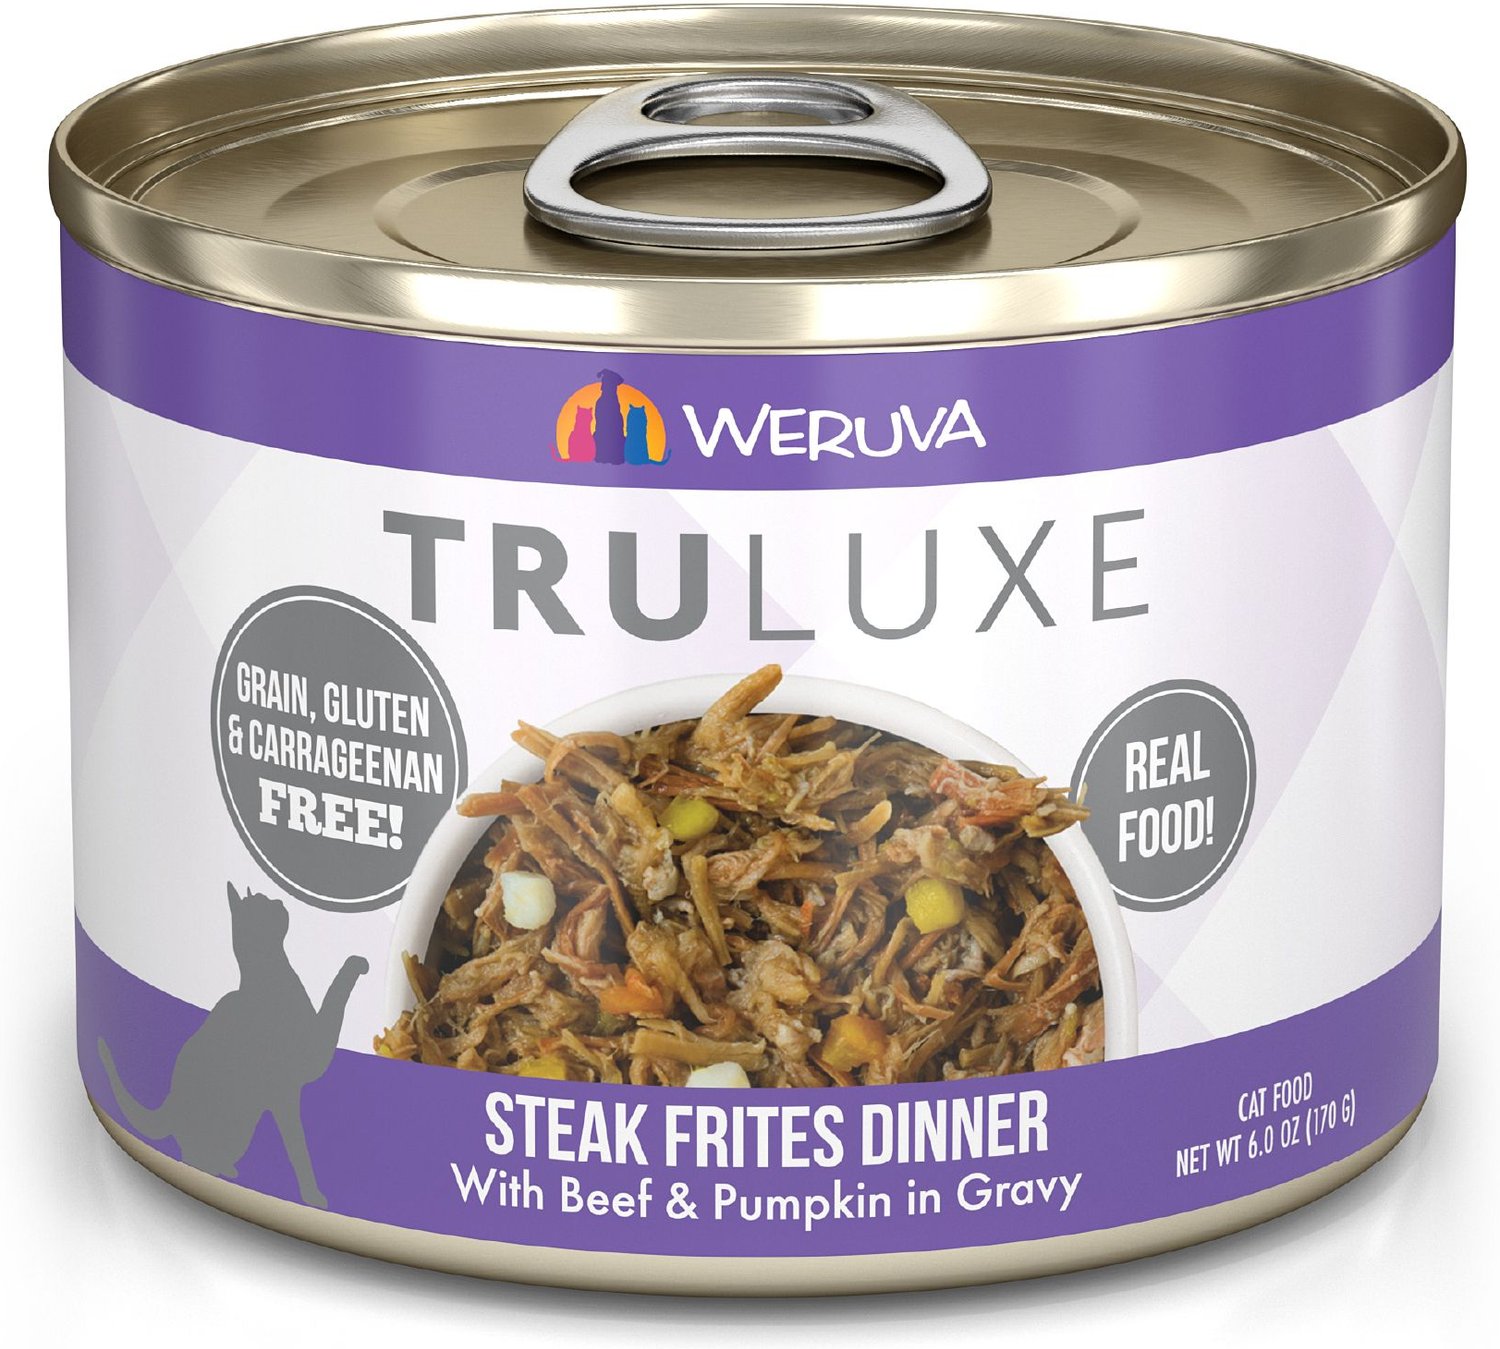 Truluxe protein cat food